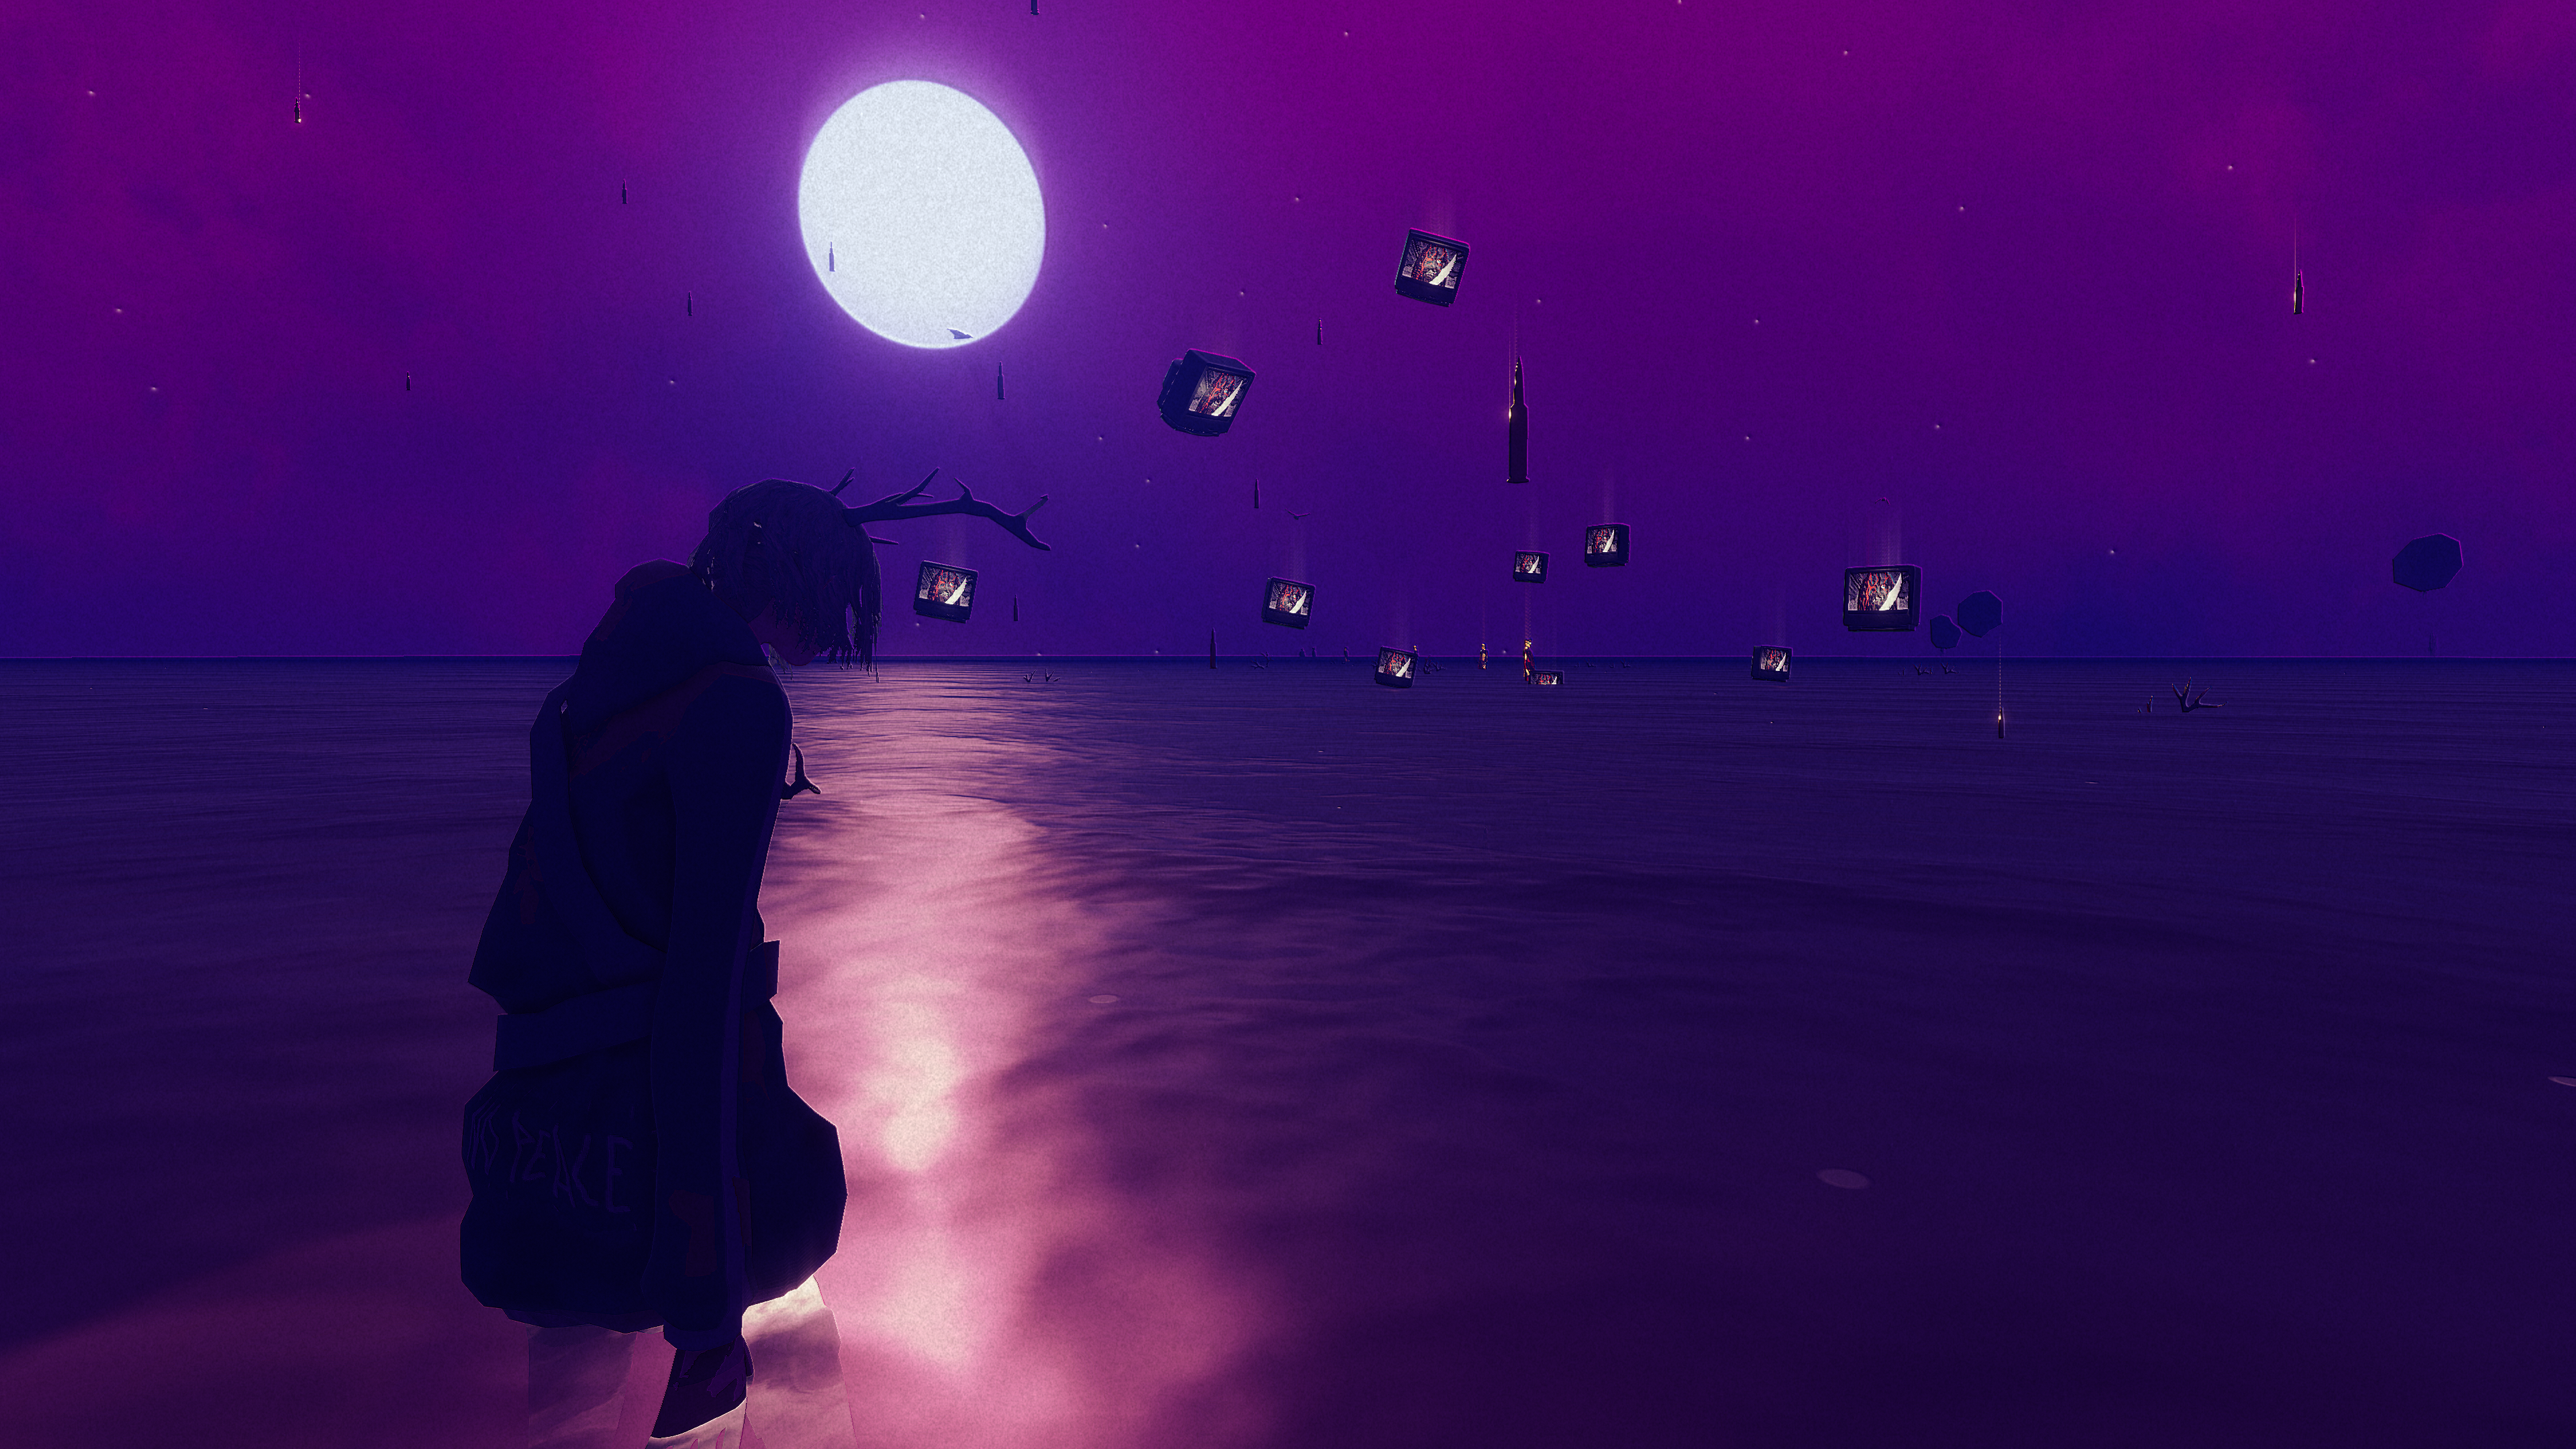 Children of the Sun screenshot of THE GIRL walking in water with floating televisions and bullets in the air under a full moon